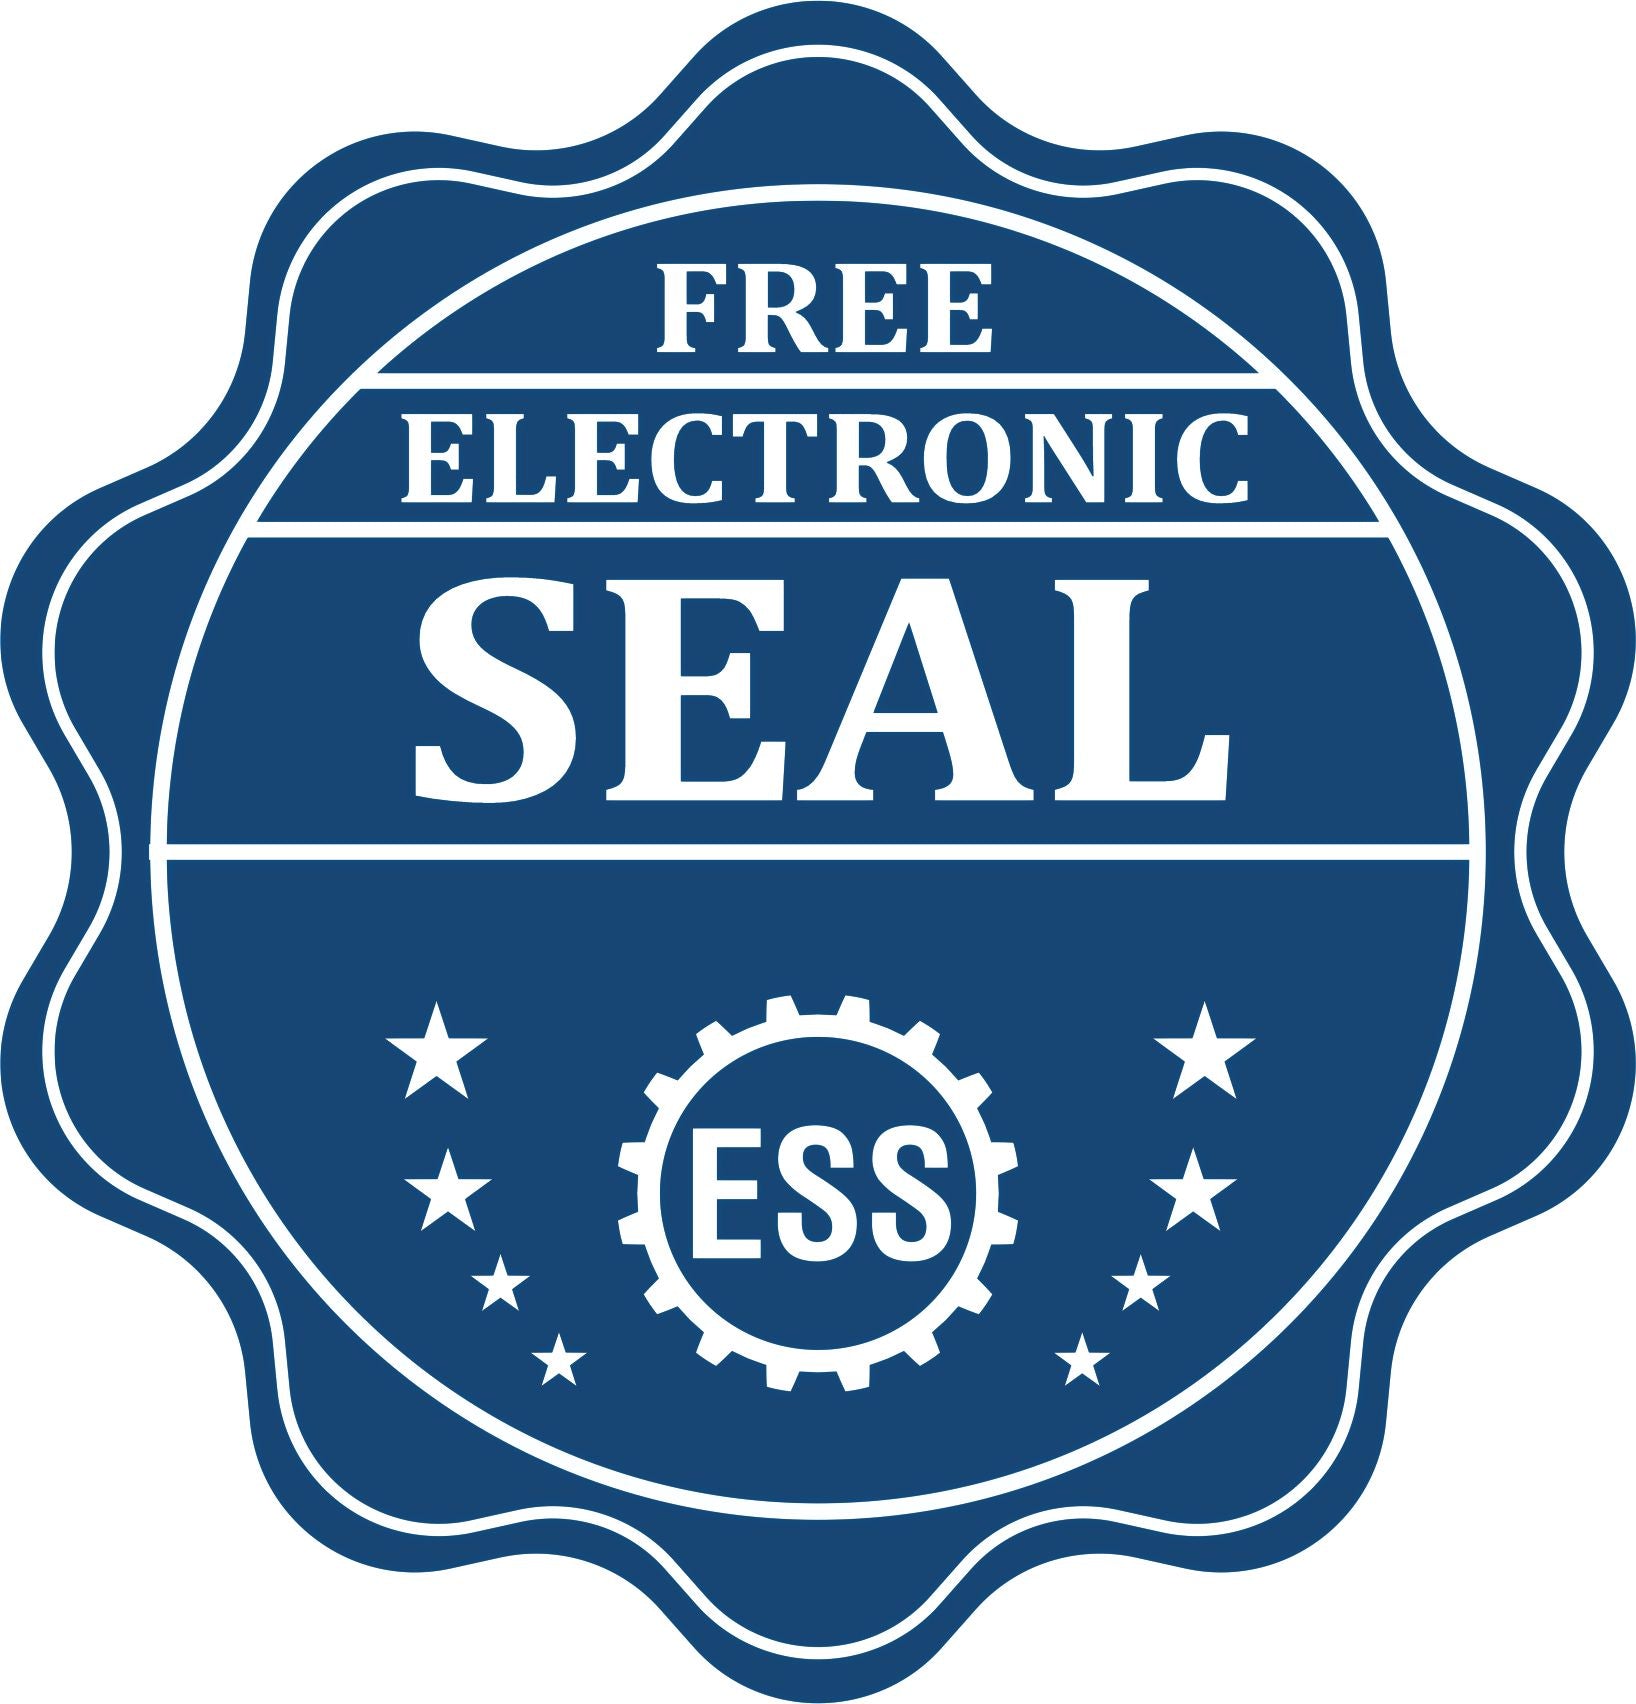 A badge showing a free electronic seal for the Hybrid North Carolina Engineer Seal with stars and the ESS gear on the emblem.